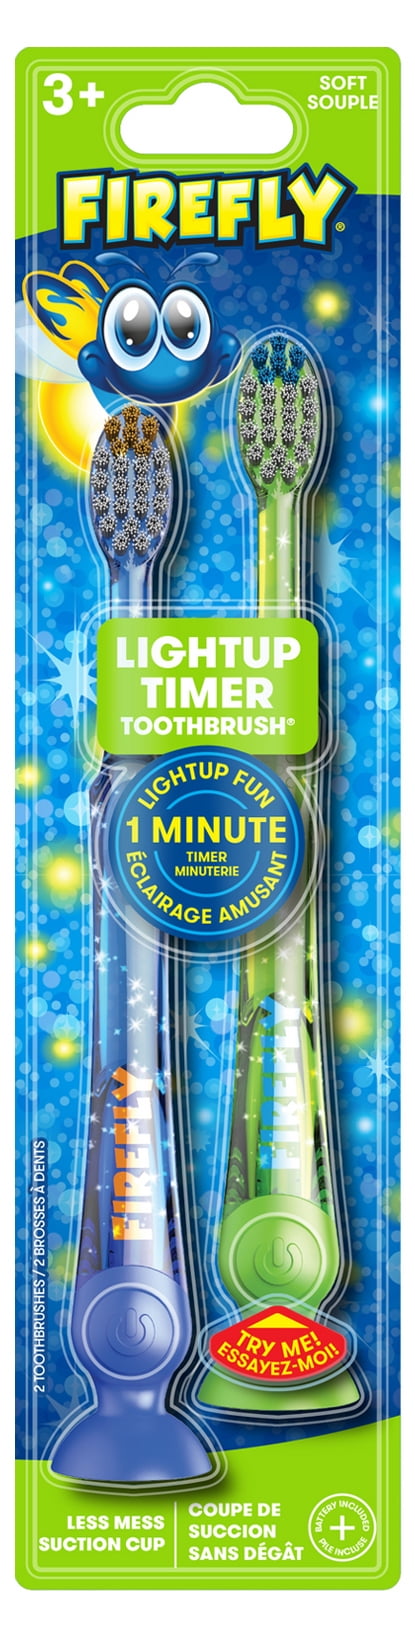 Firefly Light Up Timer Toothbrush, Premium Soft Bristles, 1 Minute Timer, Less Mess Suction Cup, Battery Included, Easy Storage, Dentist Recommended, For Ages 3+, 2 Count (Colors May Vary)